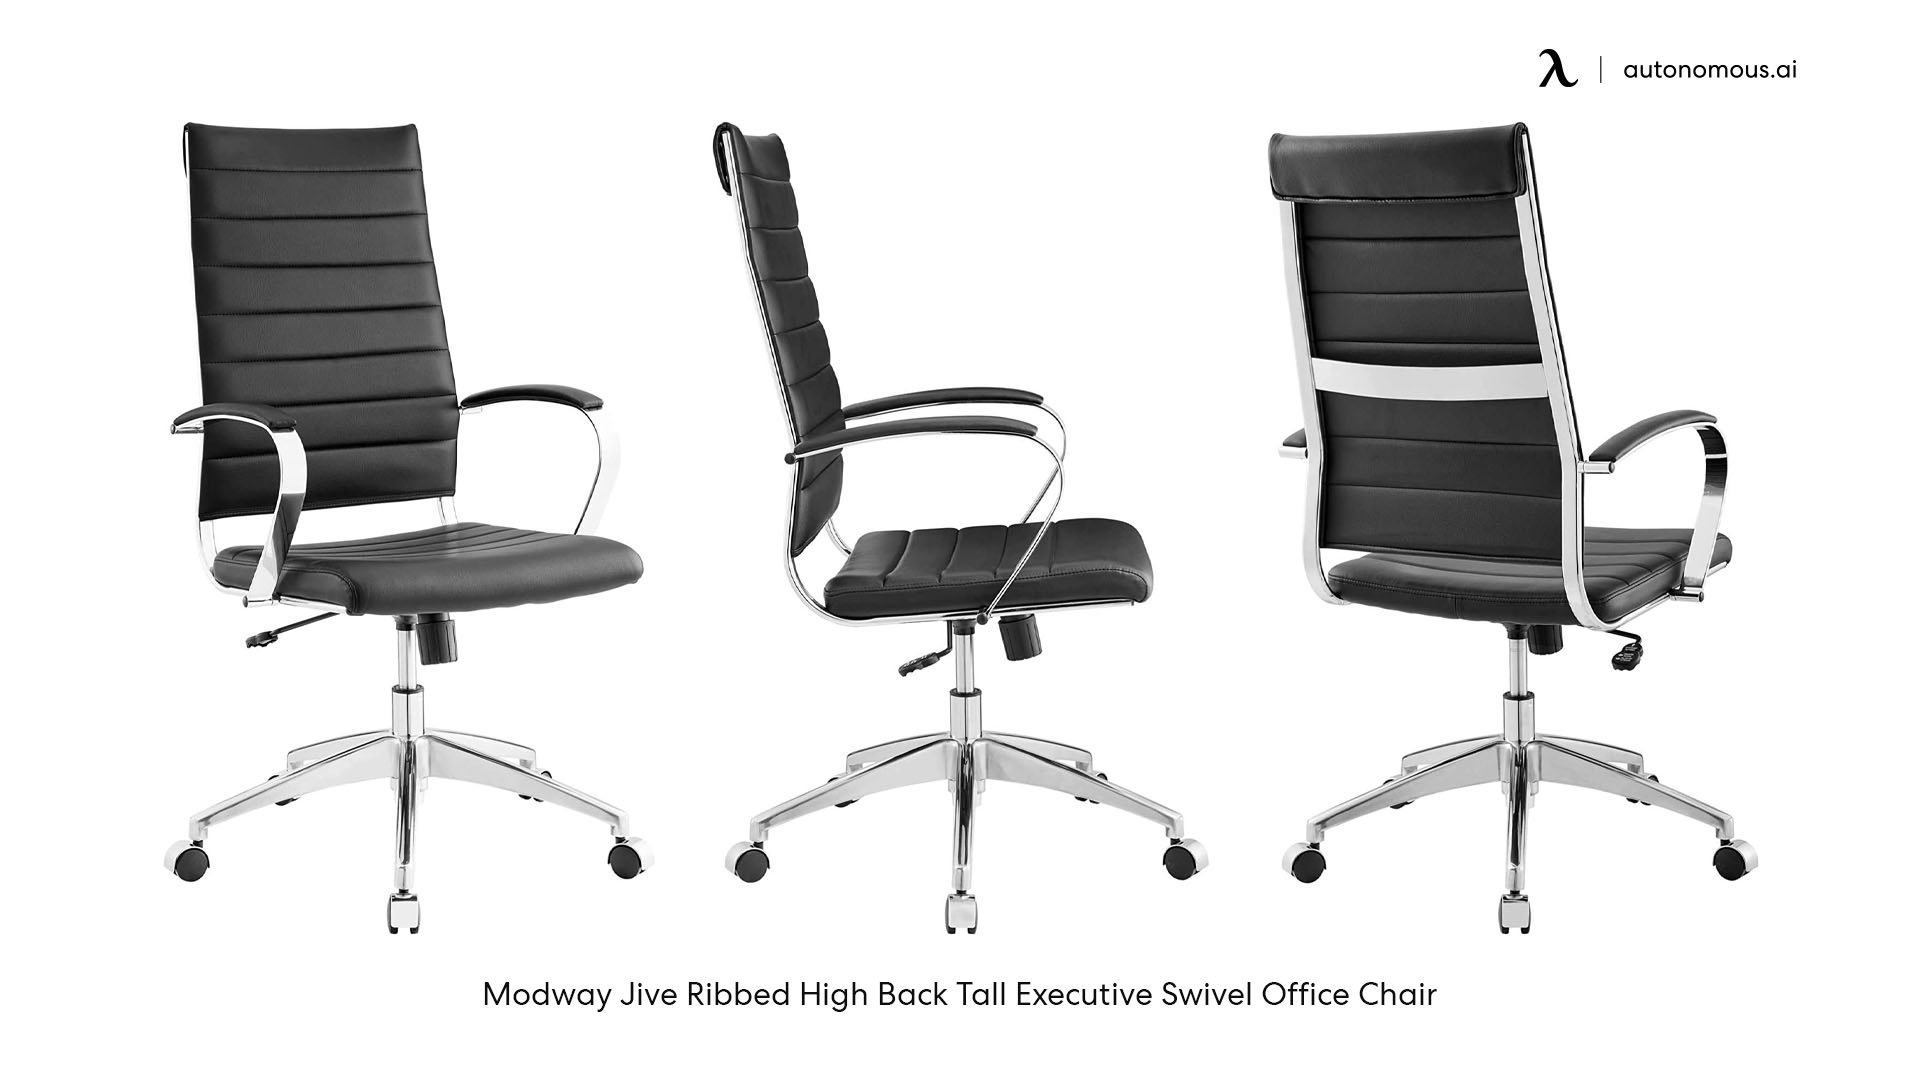 Modway Jive Ribbed best chair for posture